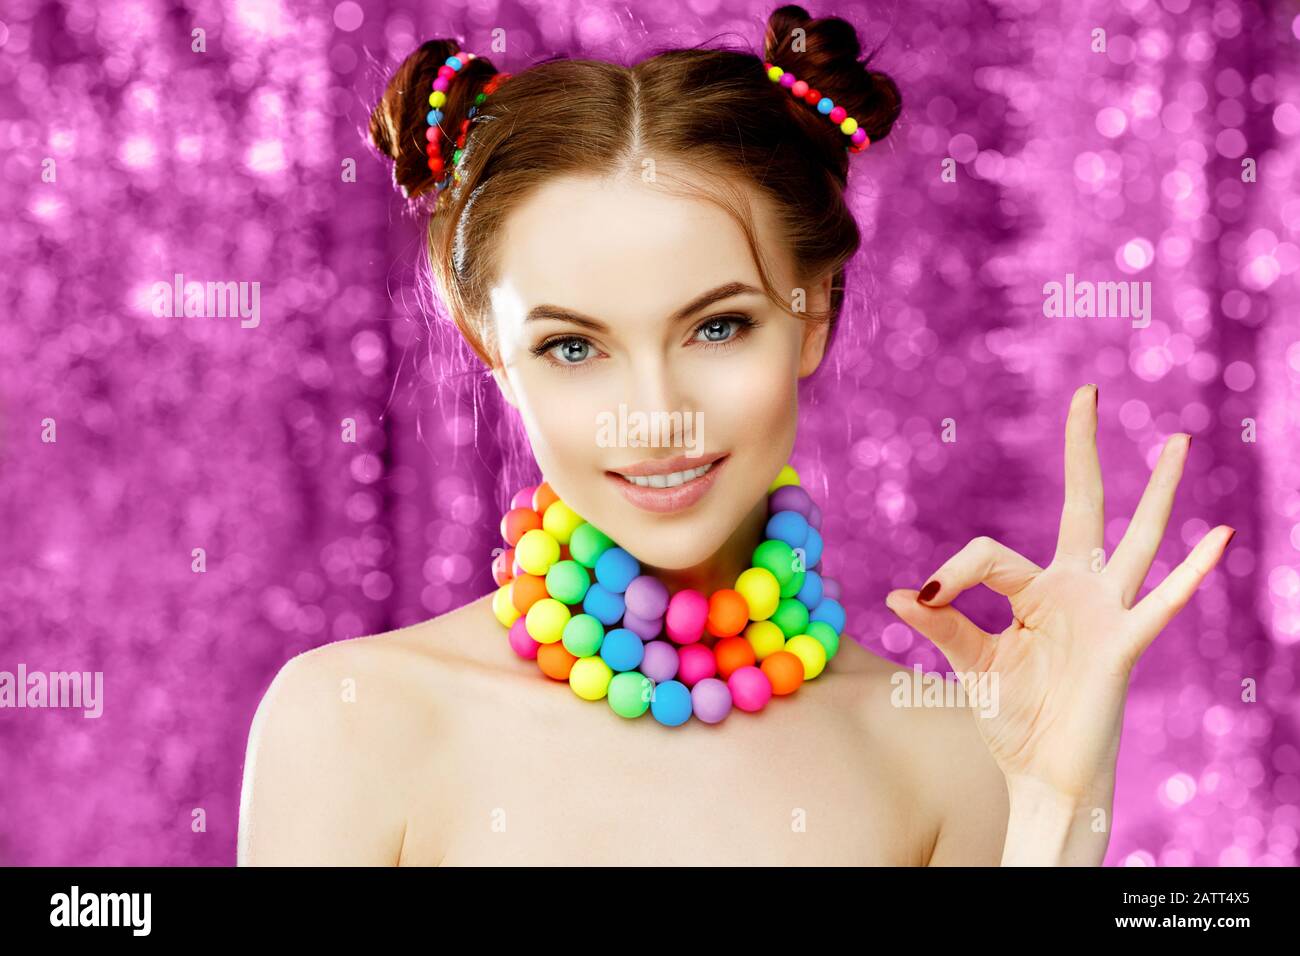 A Bright Girl Model Shows Okay Hand Fingers Beautiful Stylish Young Woman In A Candy Doll Style With Massive Beads Around Her Neck Stock Photo Alamy